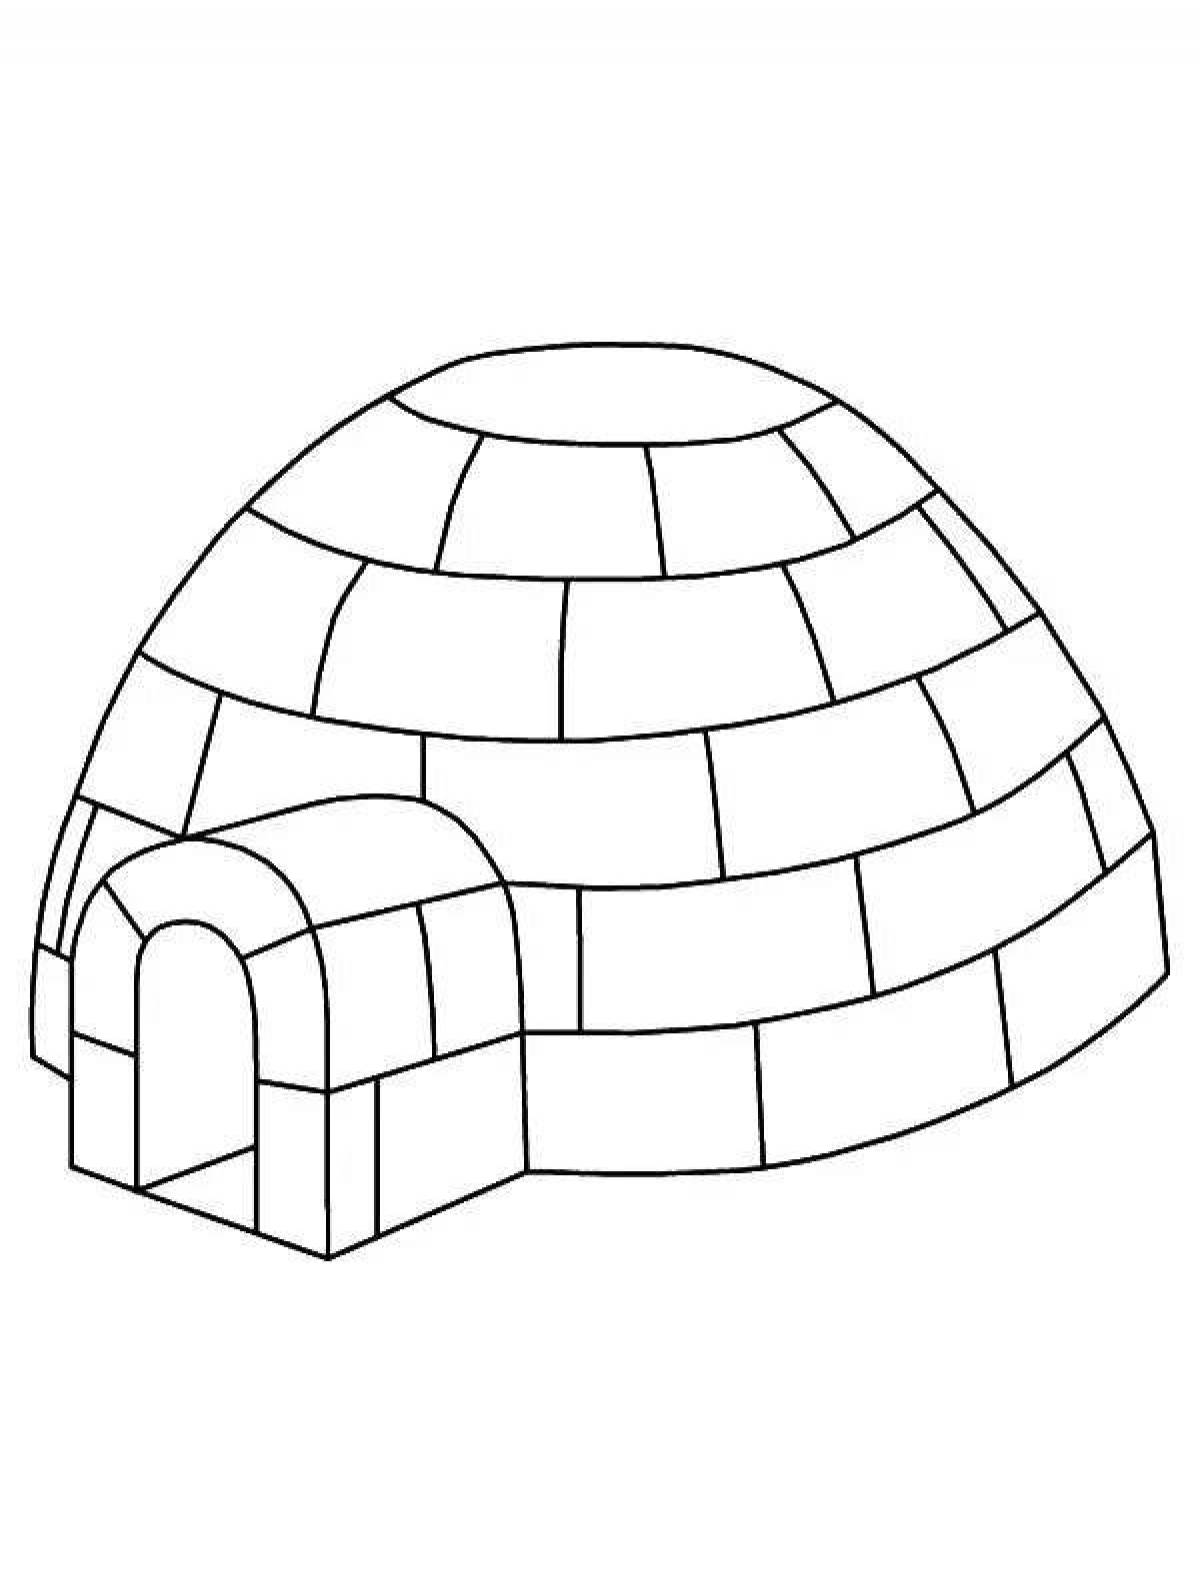 Amazing igloo coloring pages for toddlers